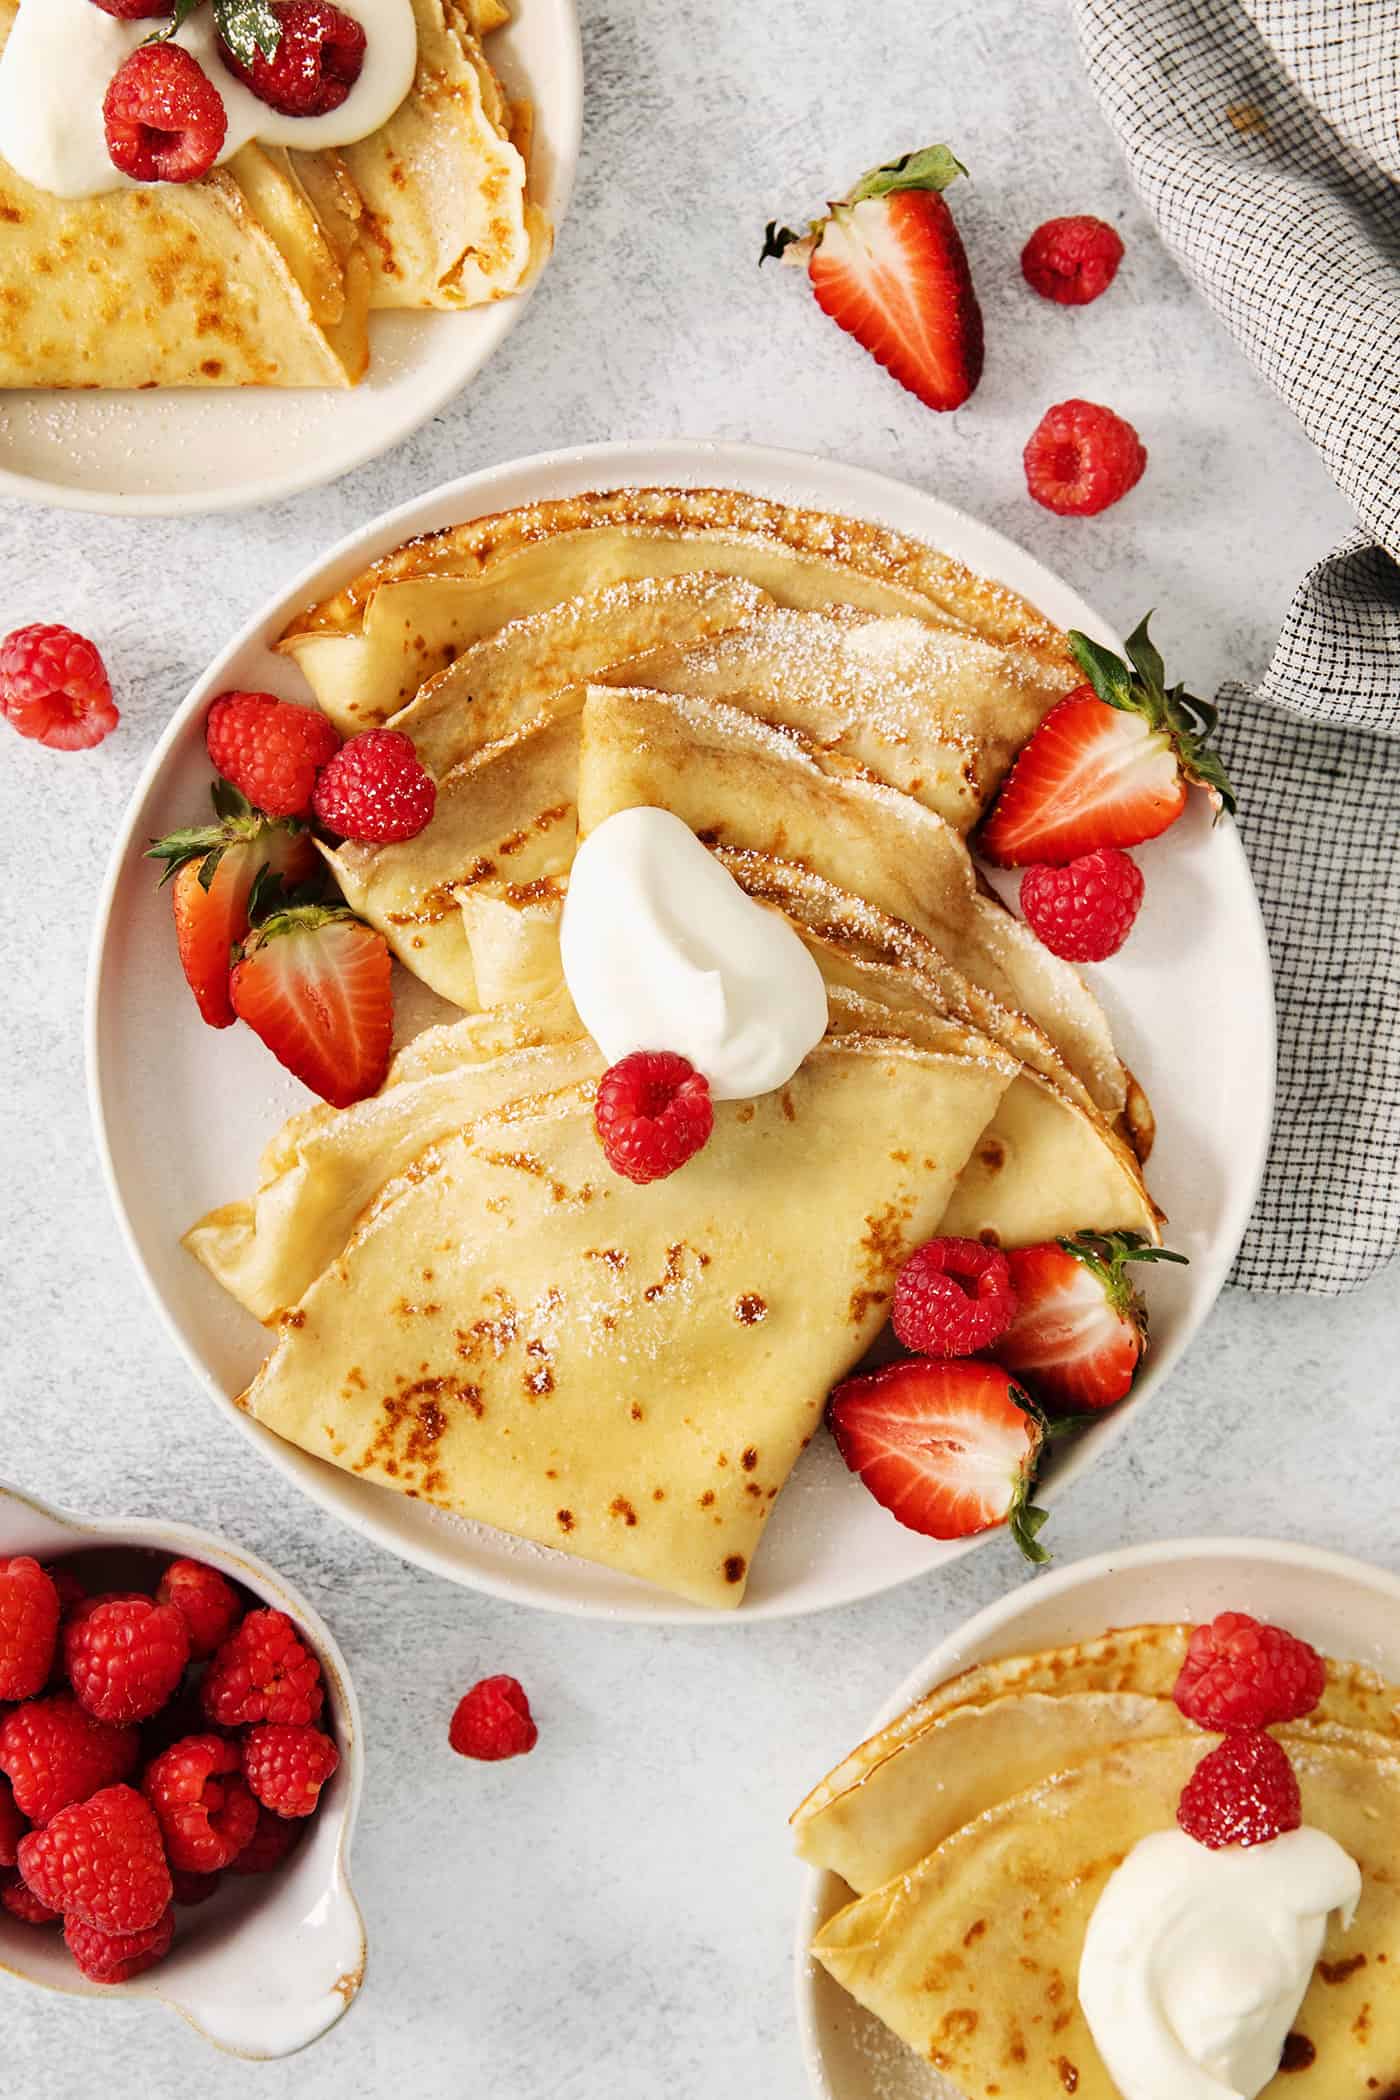 A plate of French crepes topped with strawberries on a table.